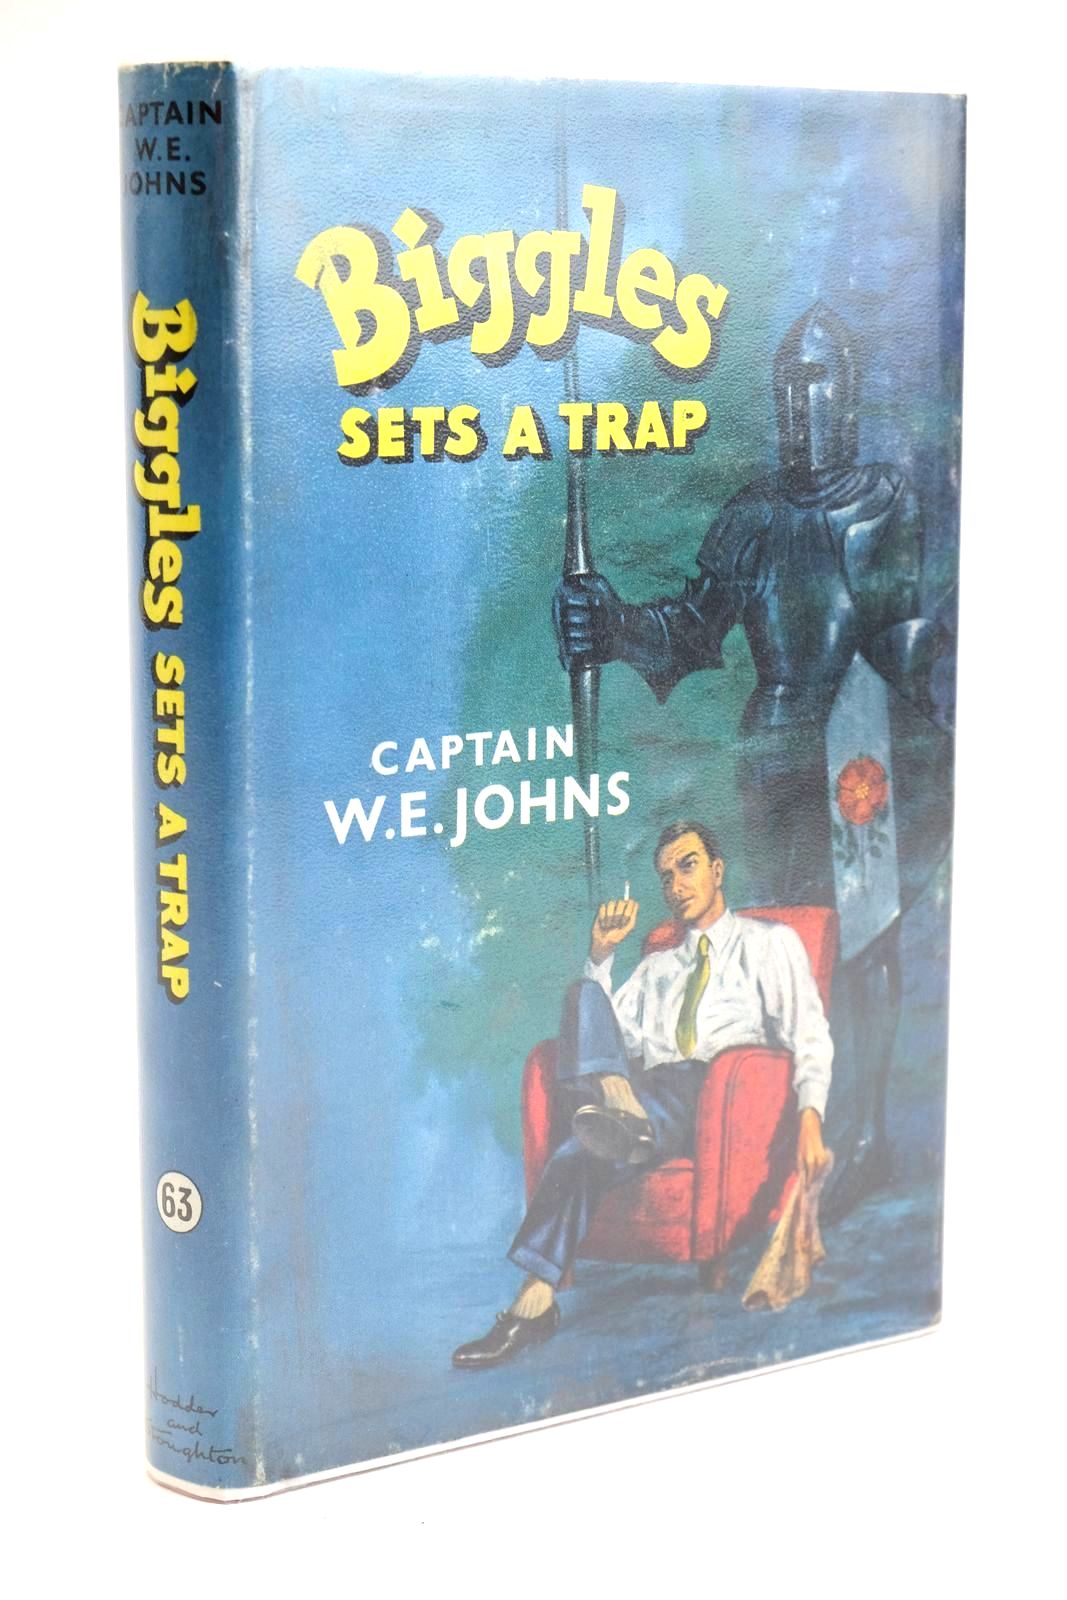 Photo of BIGGLES SETS A TRAP written by Johns, W.E. illustrated by Stead,  published by Hodder &amp; Stoughton (STOCK CODE: 1323432)  for sale by Stella & Rose's Books